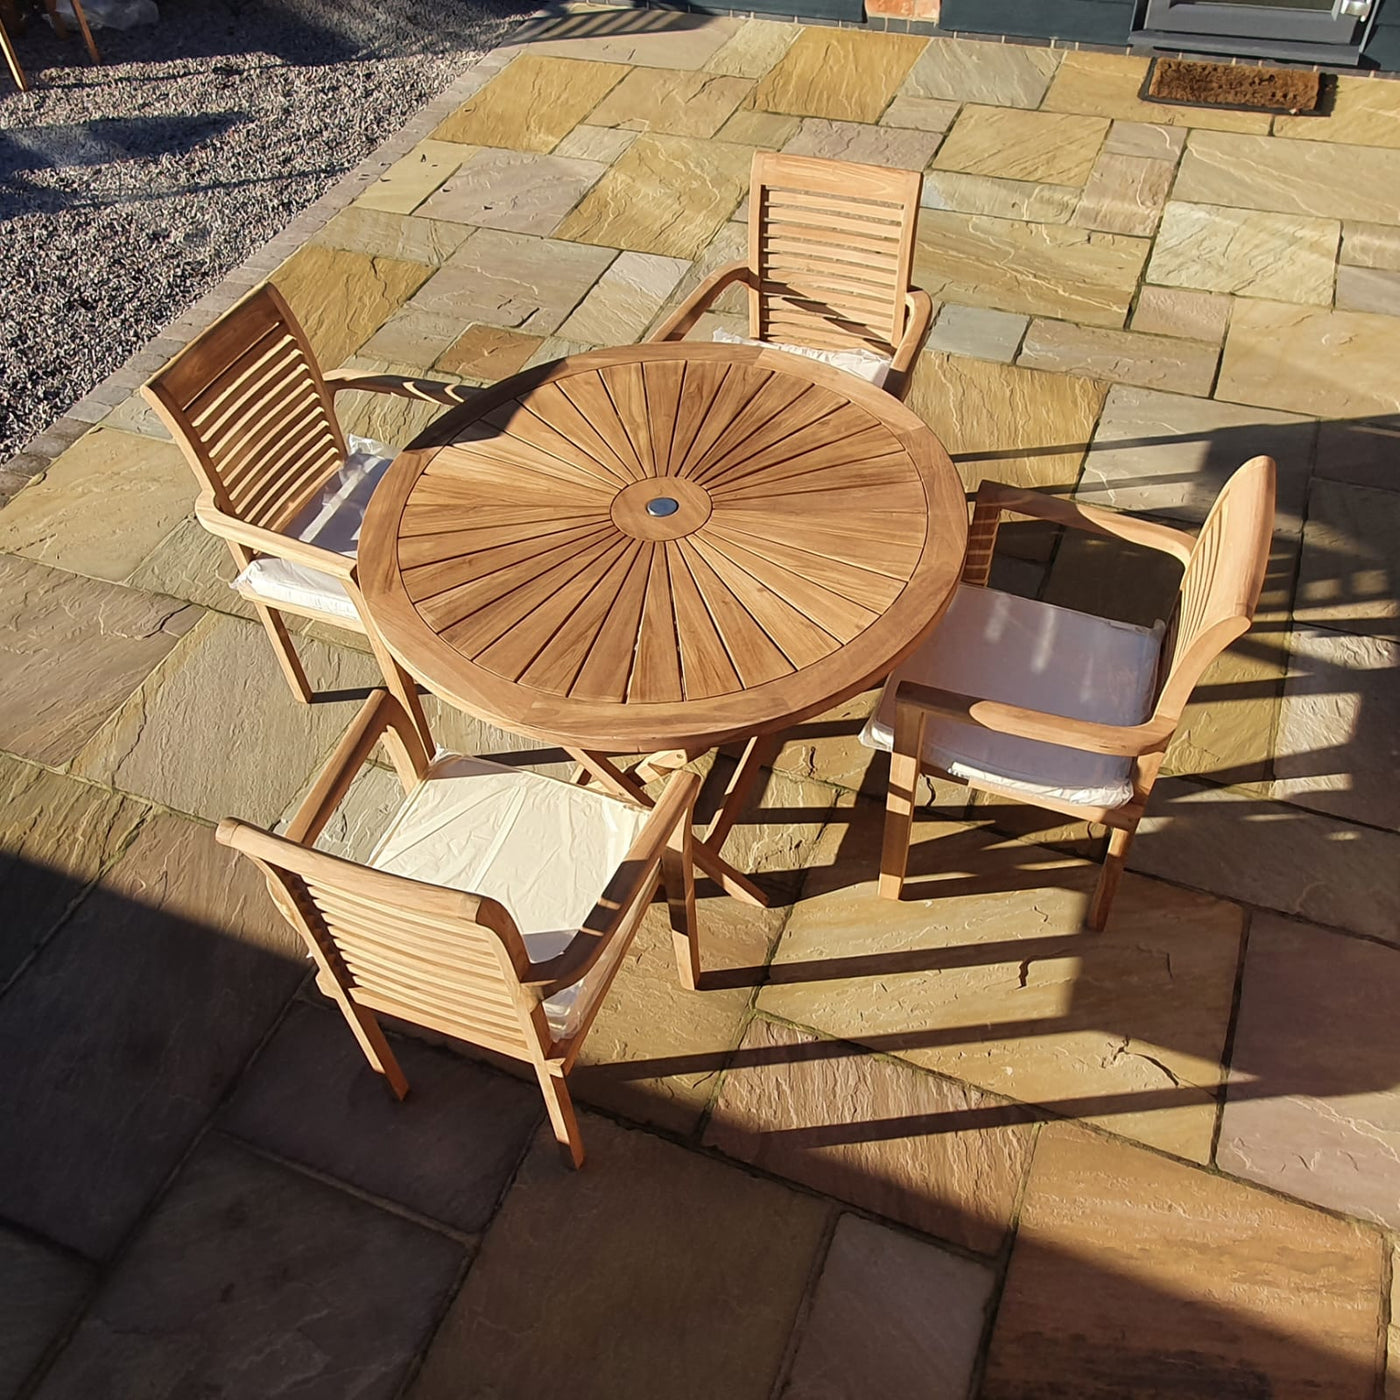 Teak Garden Furniture Set 120cm Round Sunshine Table 4 x Oxford Stacking Chairs Cushions Included - Royal finesse